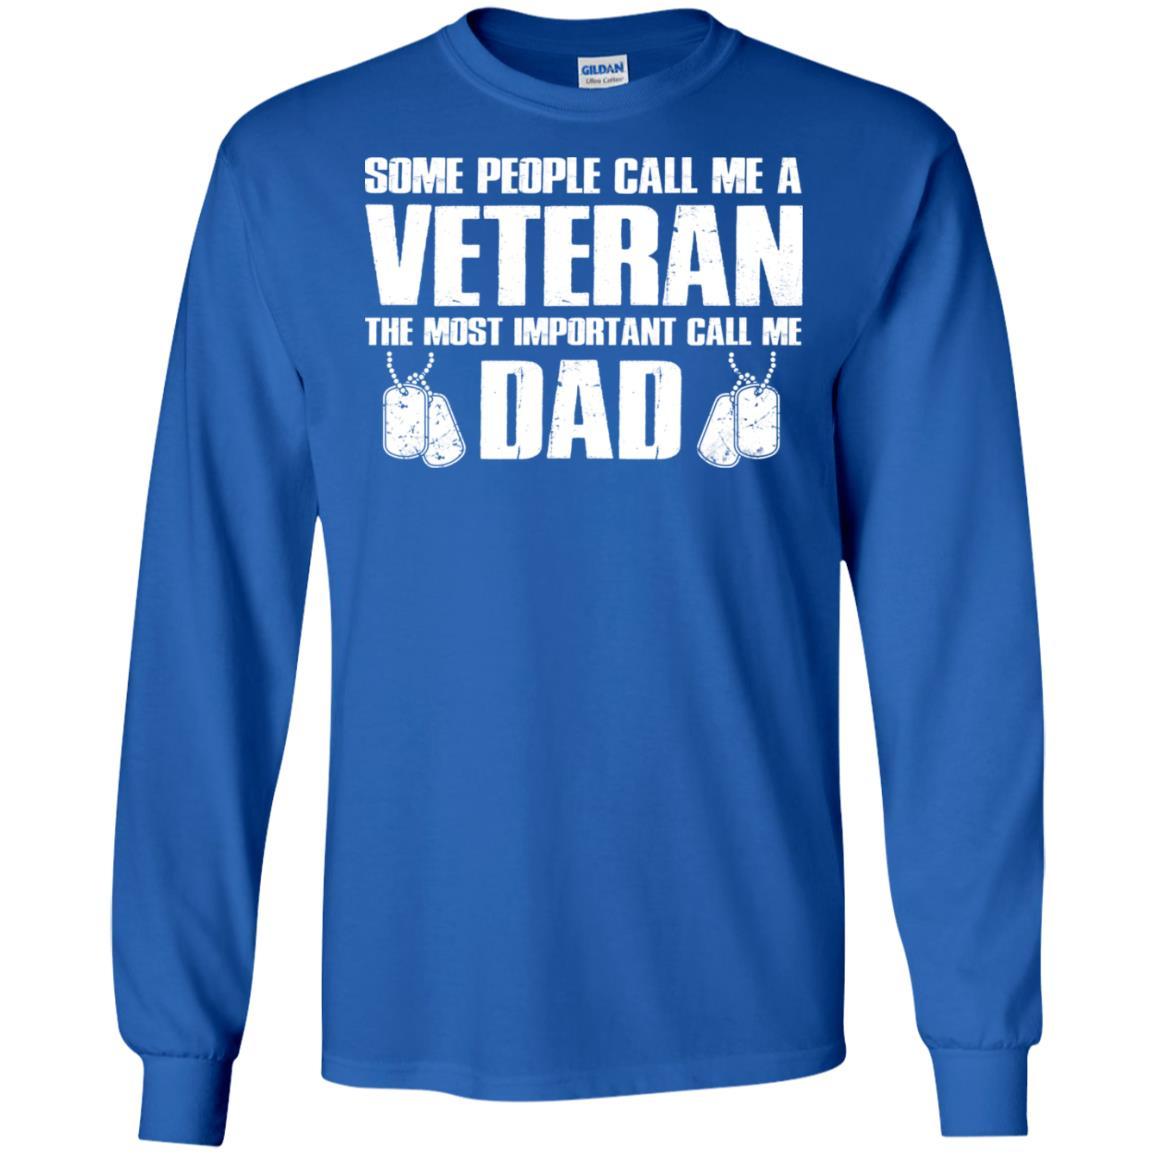 Military T-Shirt "Some People Call Me A Veteran The Most Inportant Call Me Dad On" Front-TShirt-General-Veterans Nation